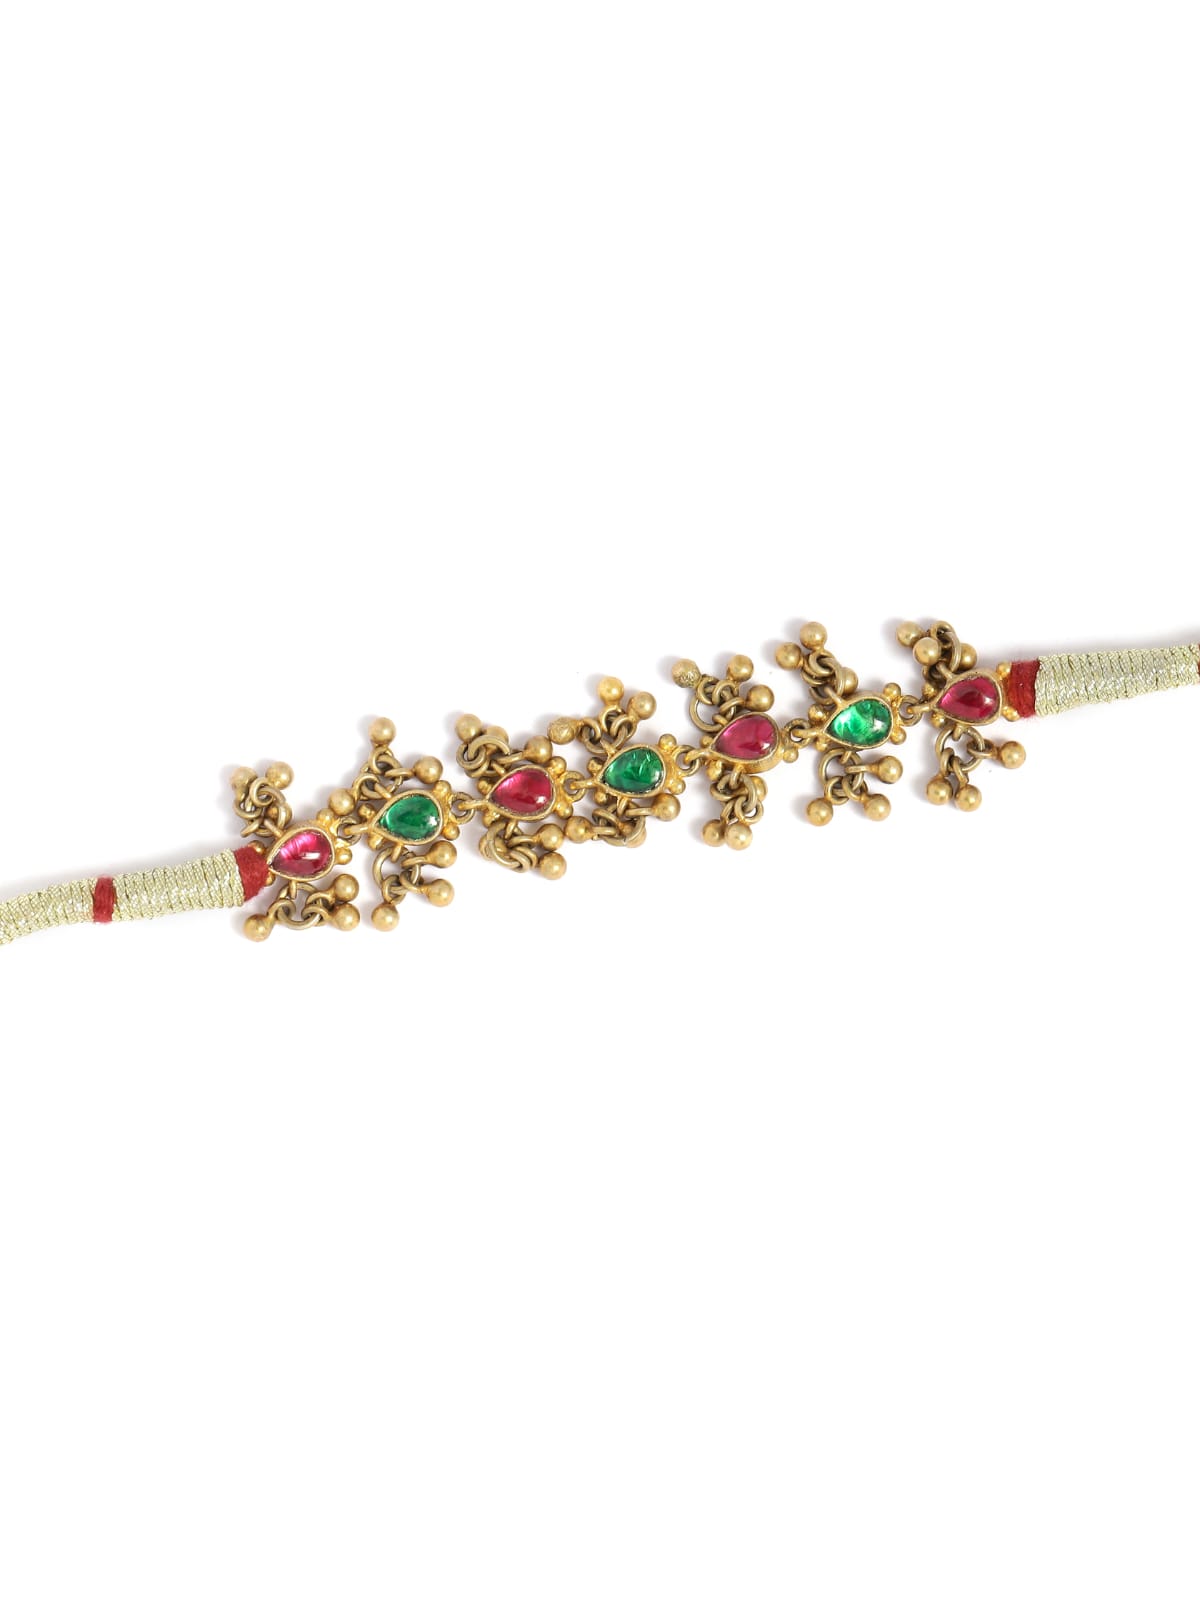 Sterling Silver Paunchi bracelet with micron Gold plating, red and green Onyx with ghungroos, adjustable.